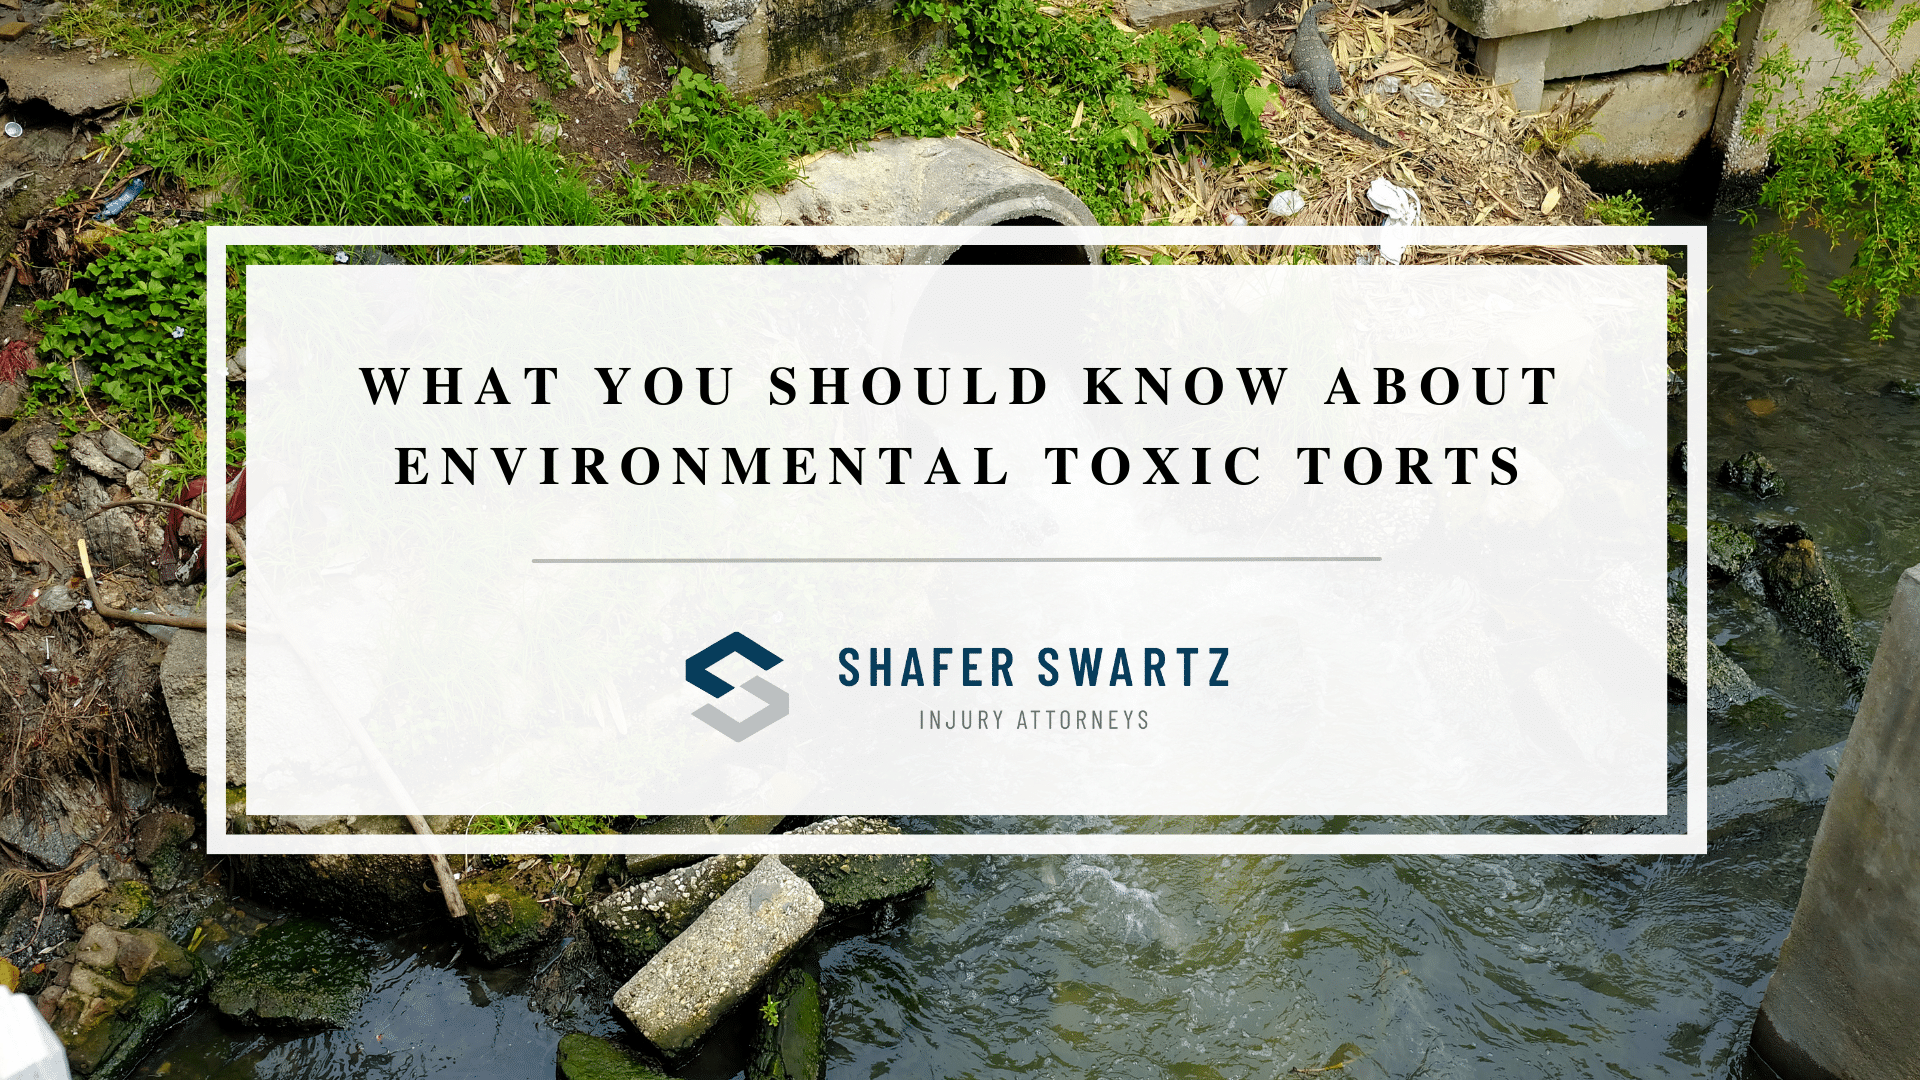 Featured image of what you should know about environmental toxic torts